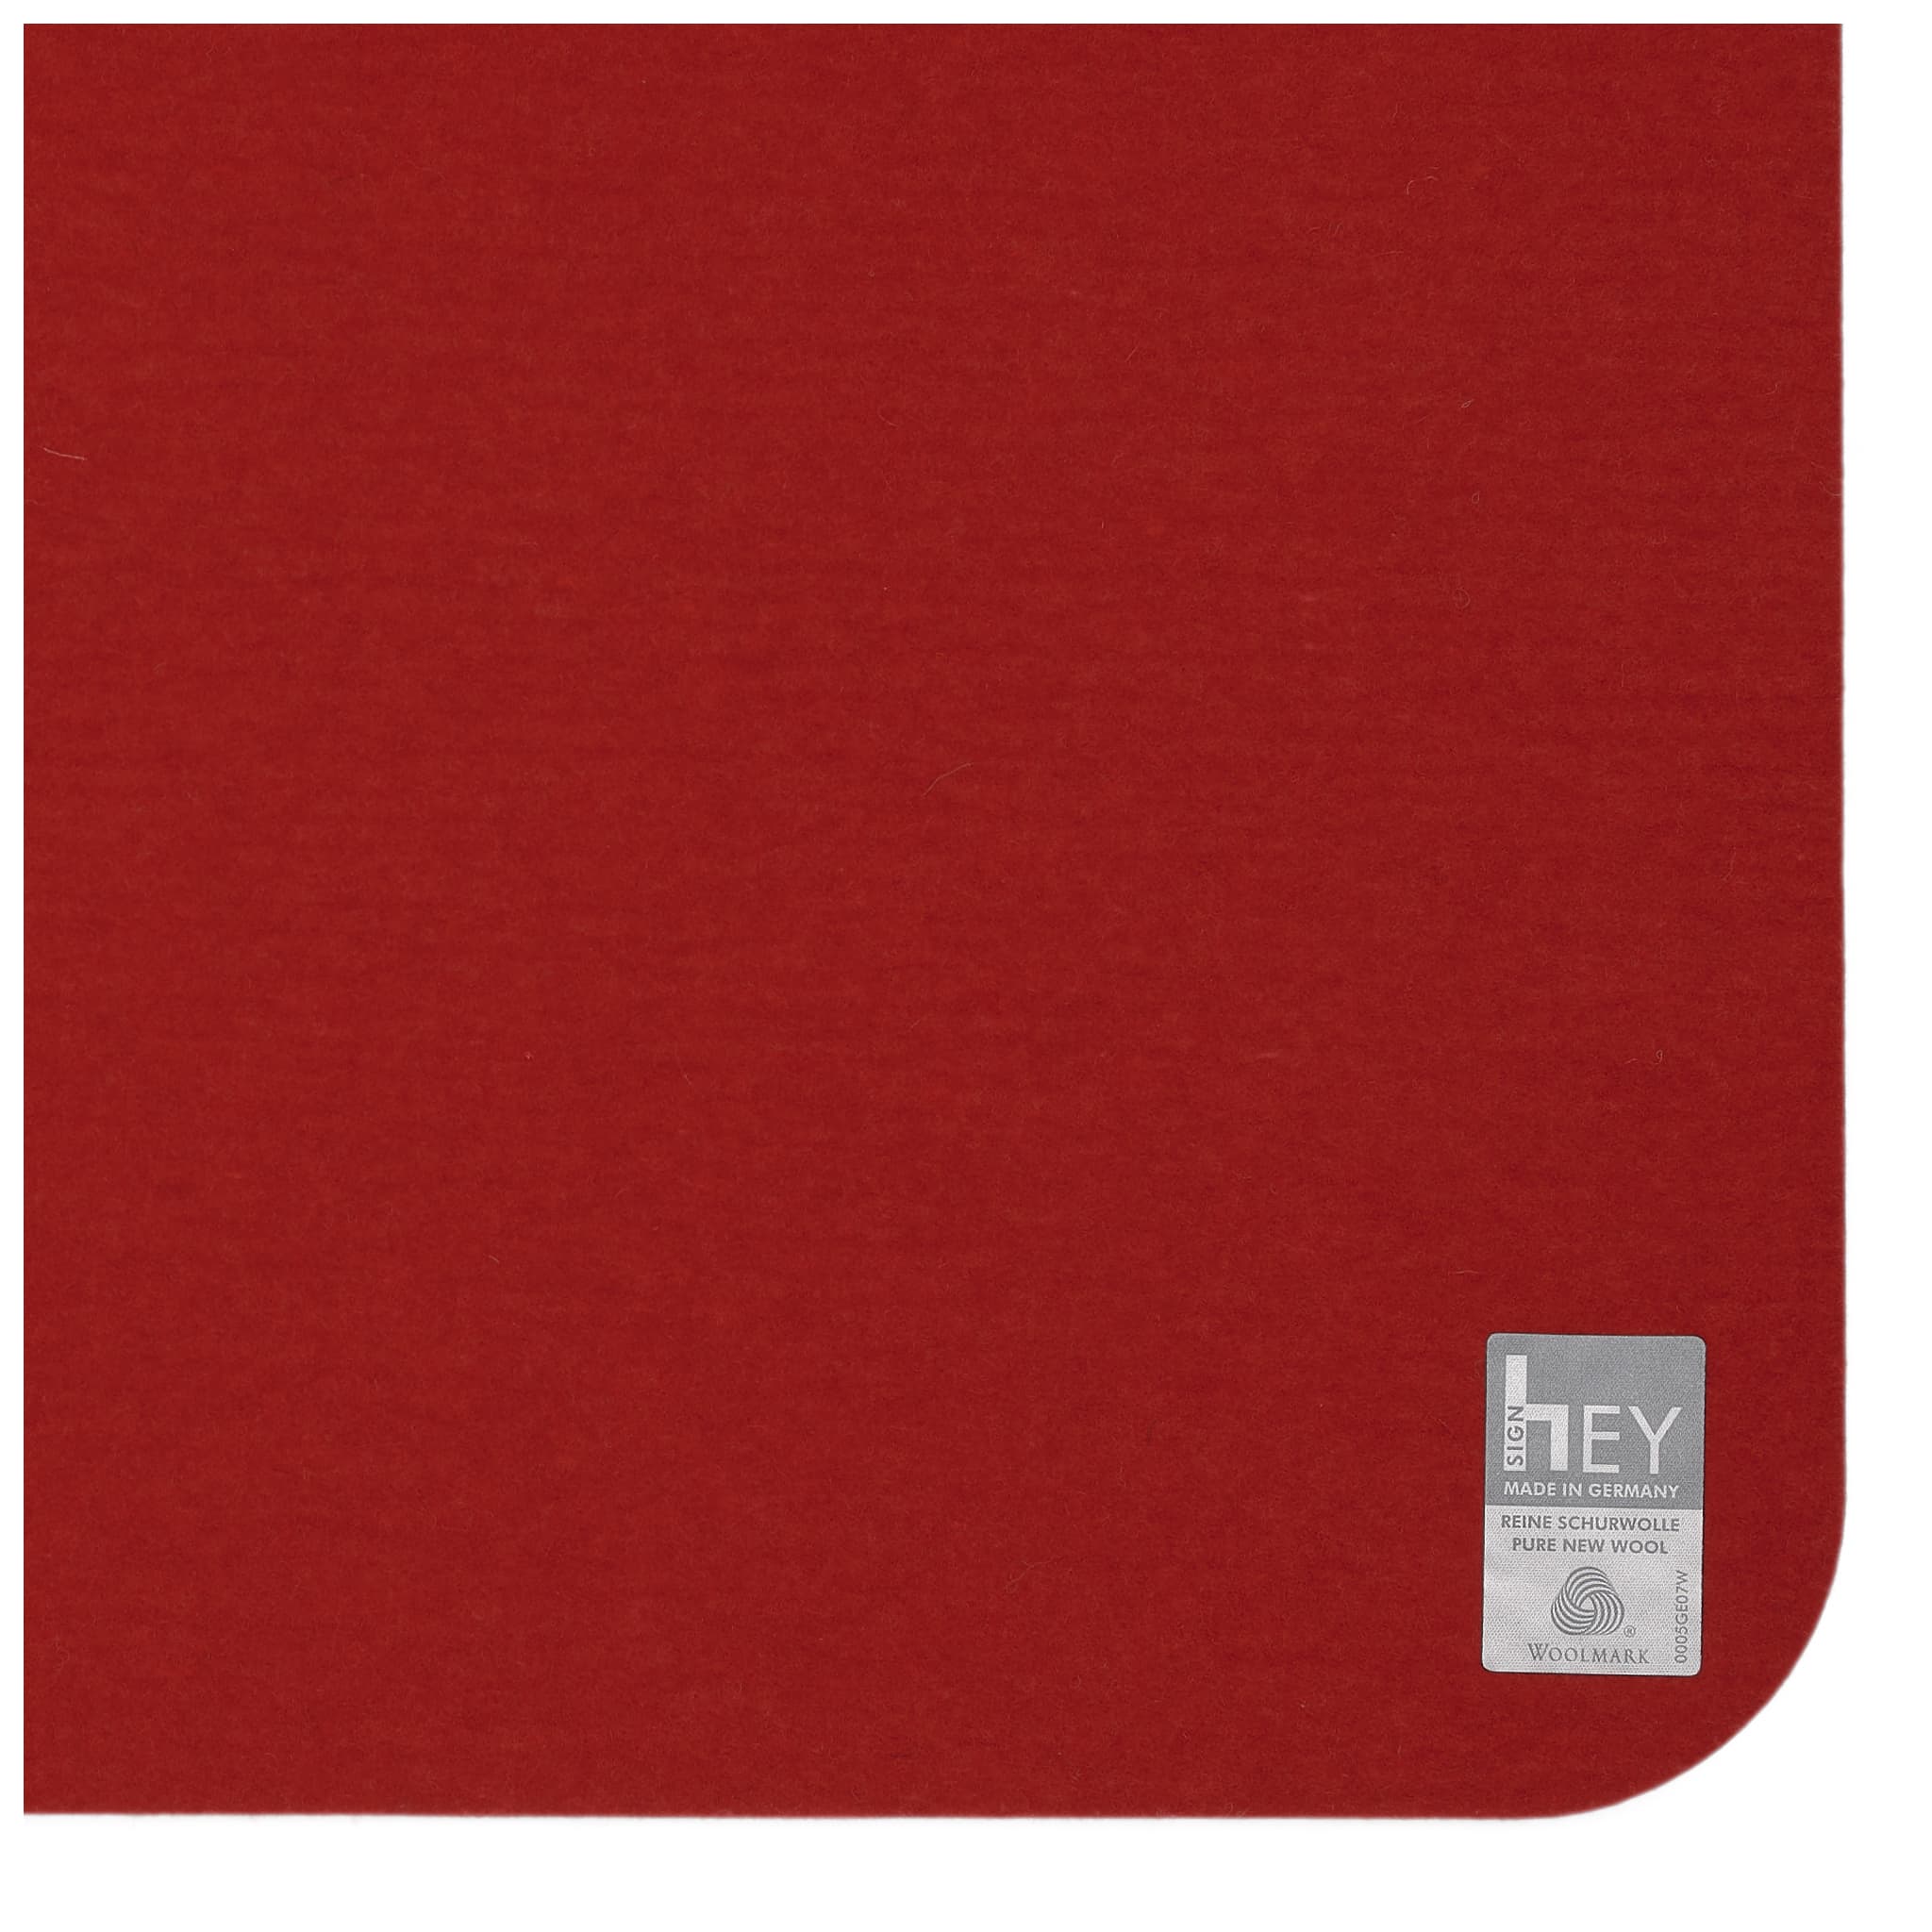 Rectangular Felt Placemat in Red by Hey-Sign 300134502 looking at Closeup-Label